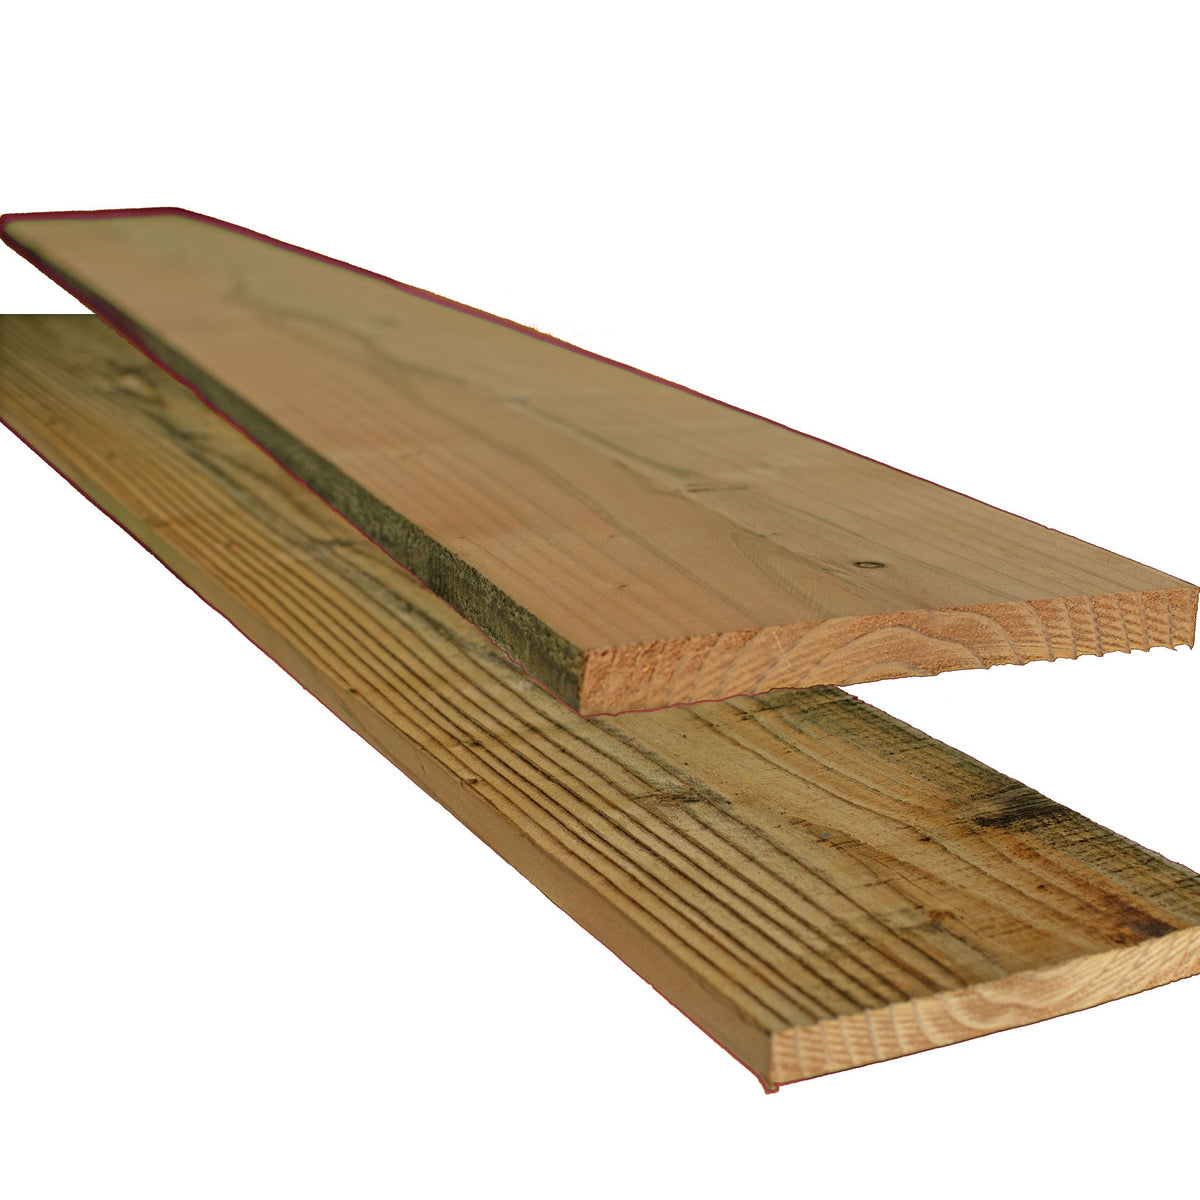 Wood panels are rough on 1 side and smooth and flat on the other side for easy installation.